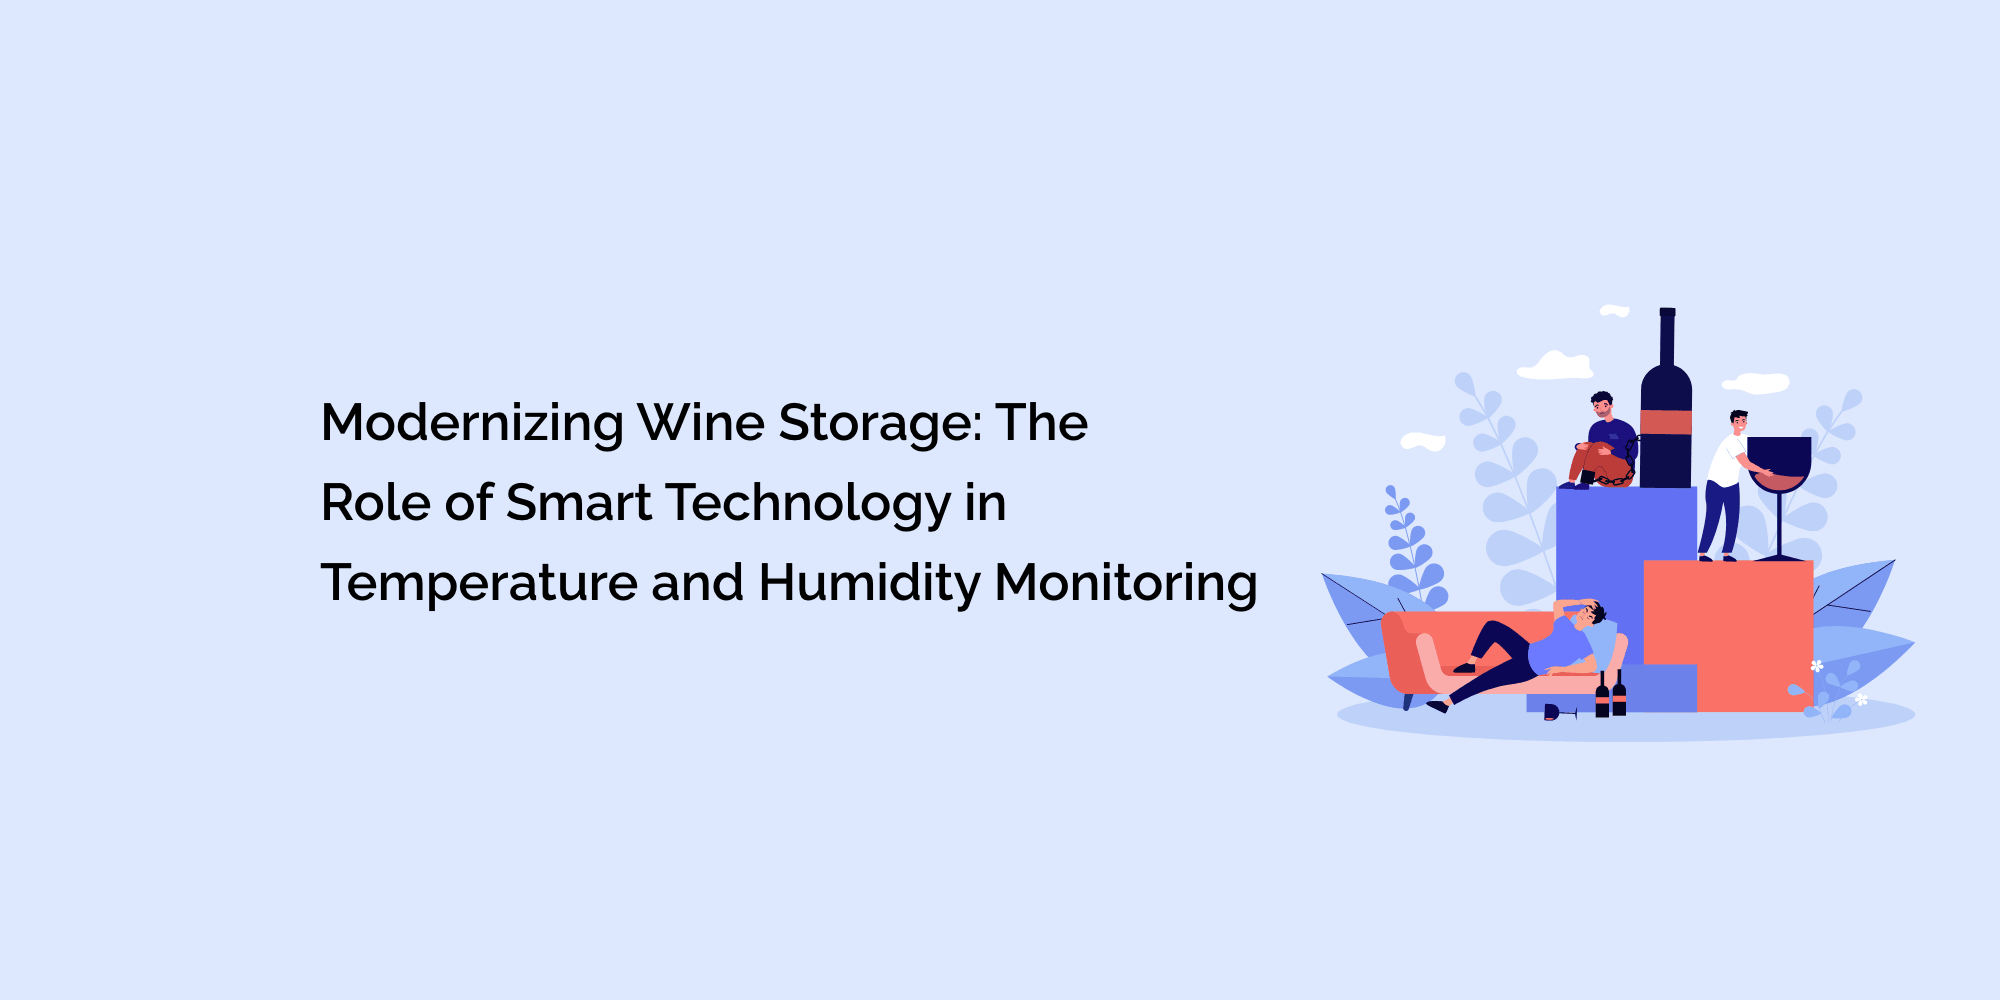 Modernizing Wine Storage: The Role of Smart Technology in Temperature and Humidity Monitoring